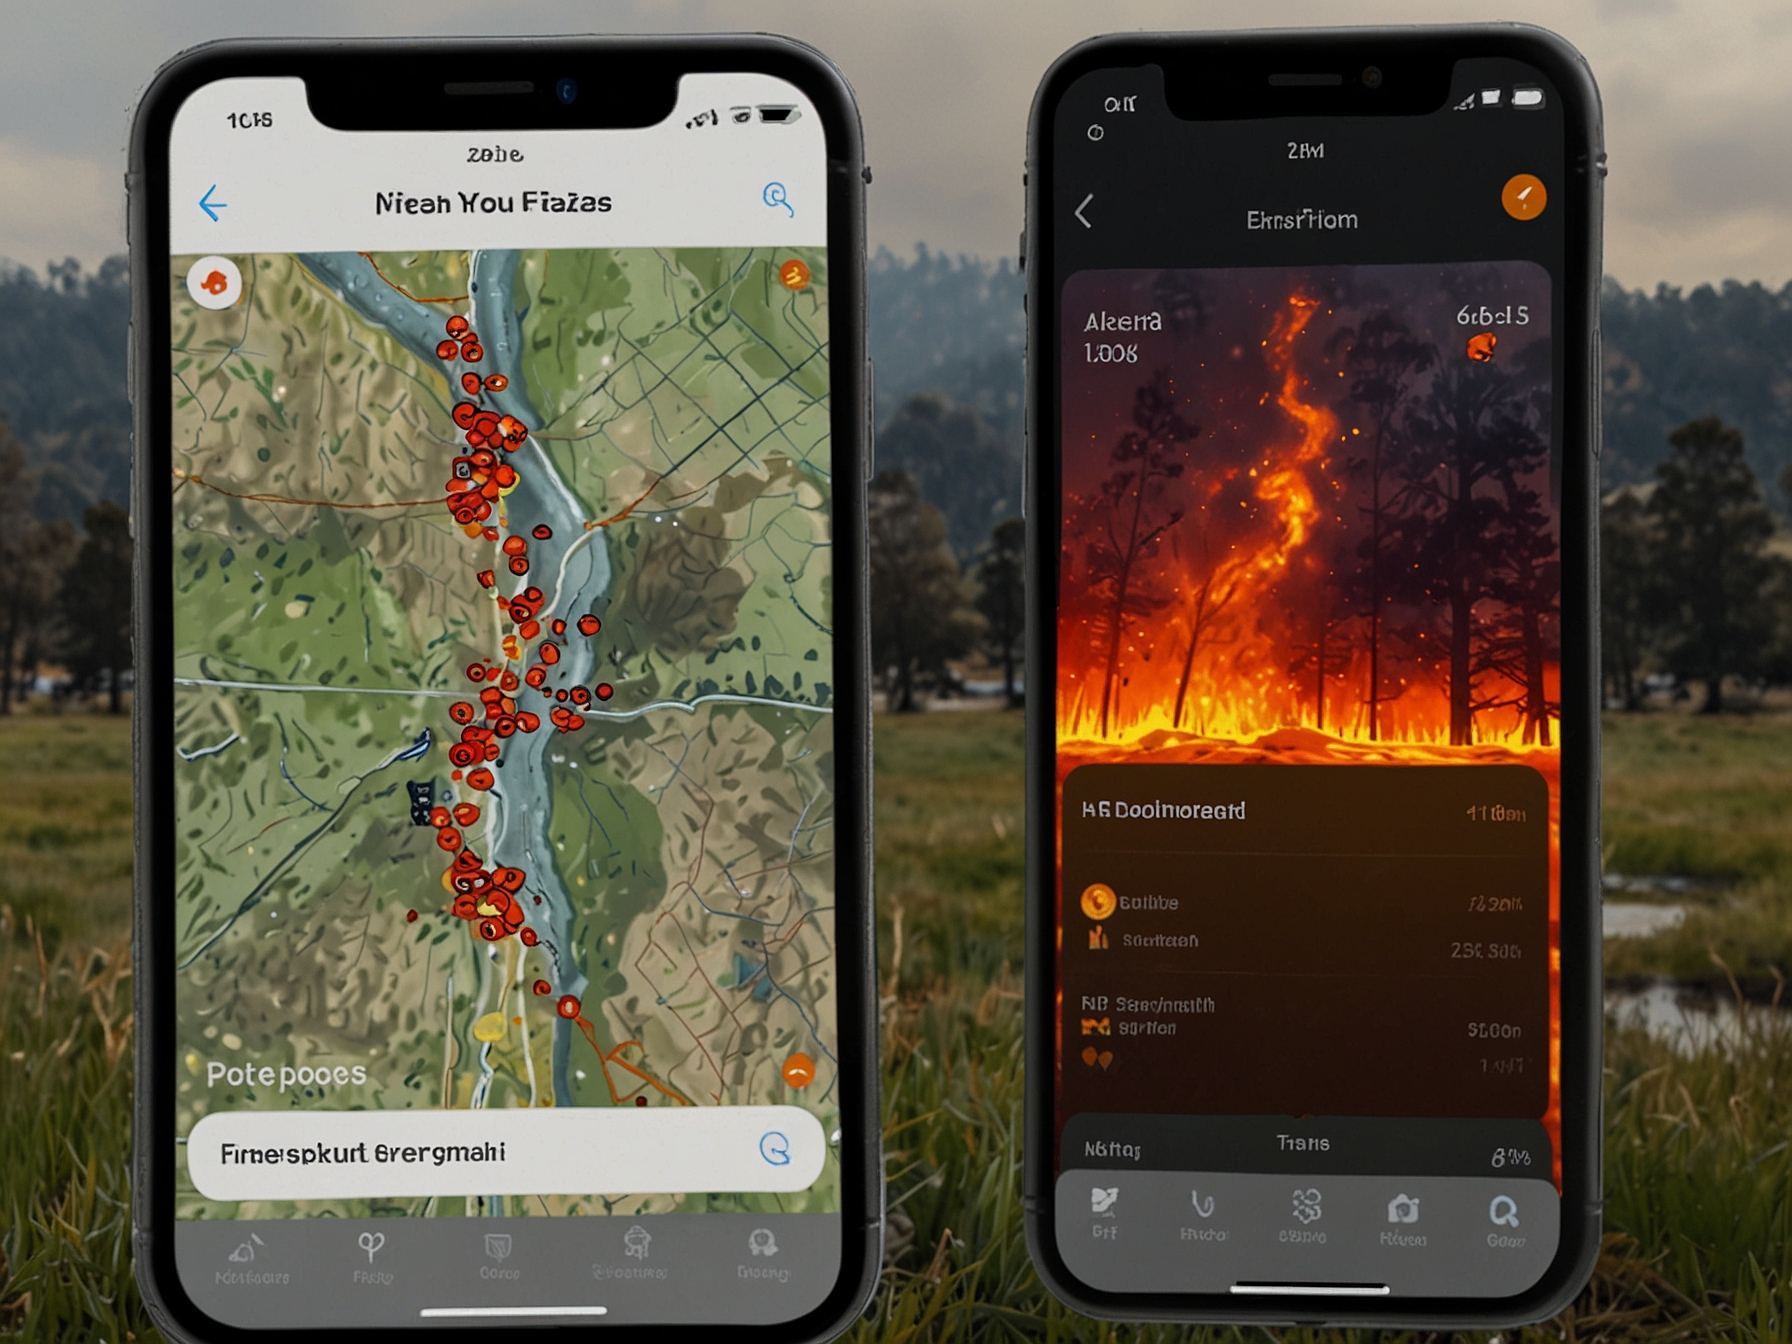 Screenshots of the fire-charting app displaying real-time fire hotspots and predictions, providing authorities with essential data to proactively manage and mitigate fires.